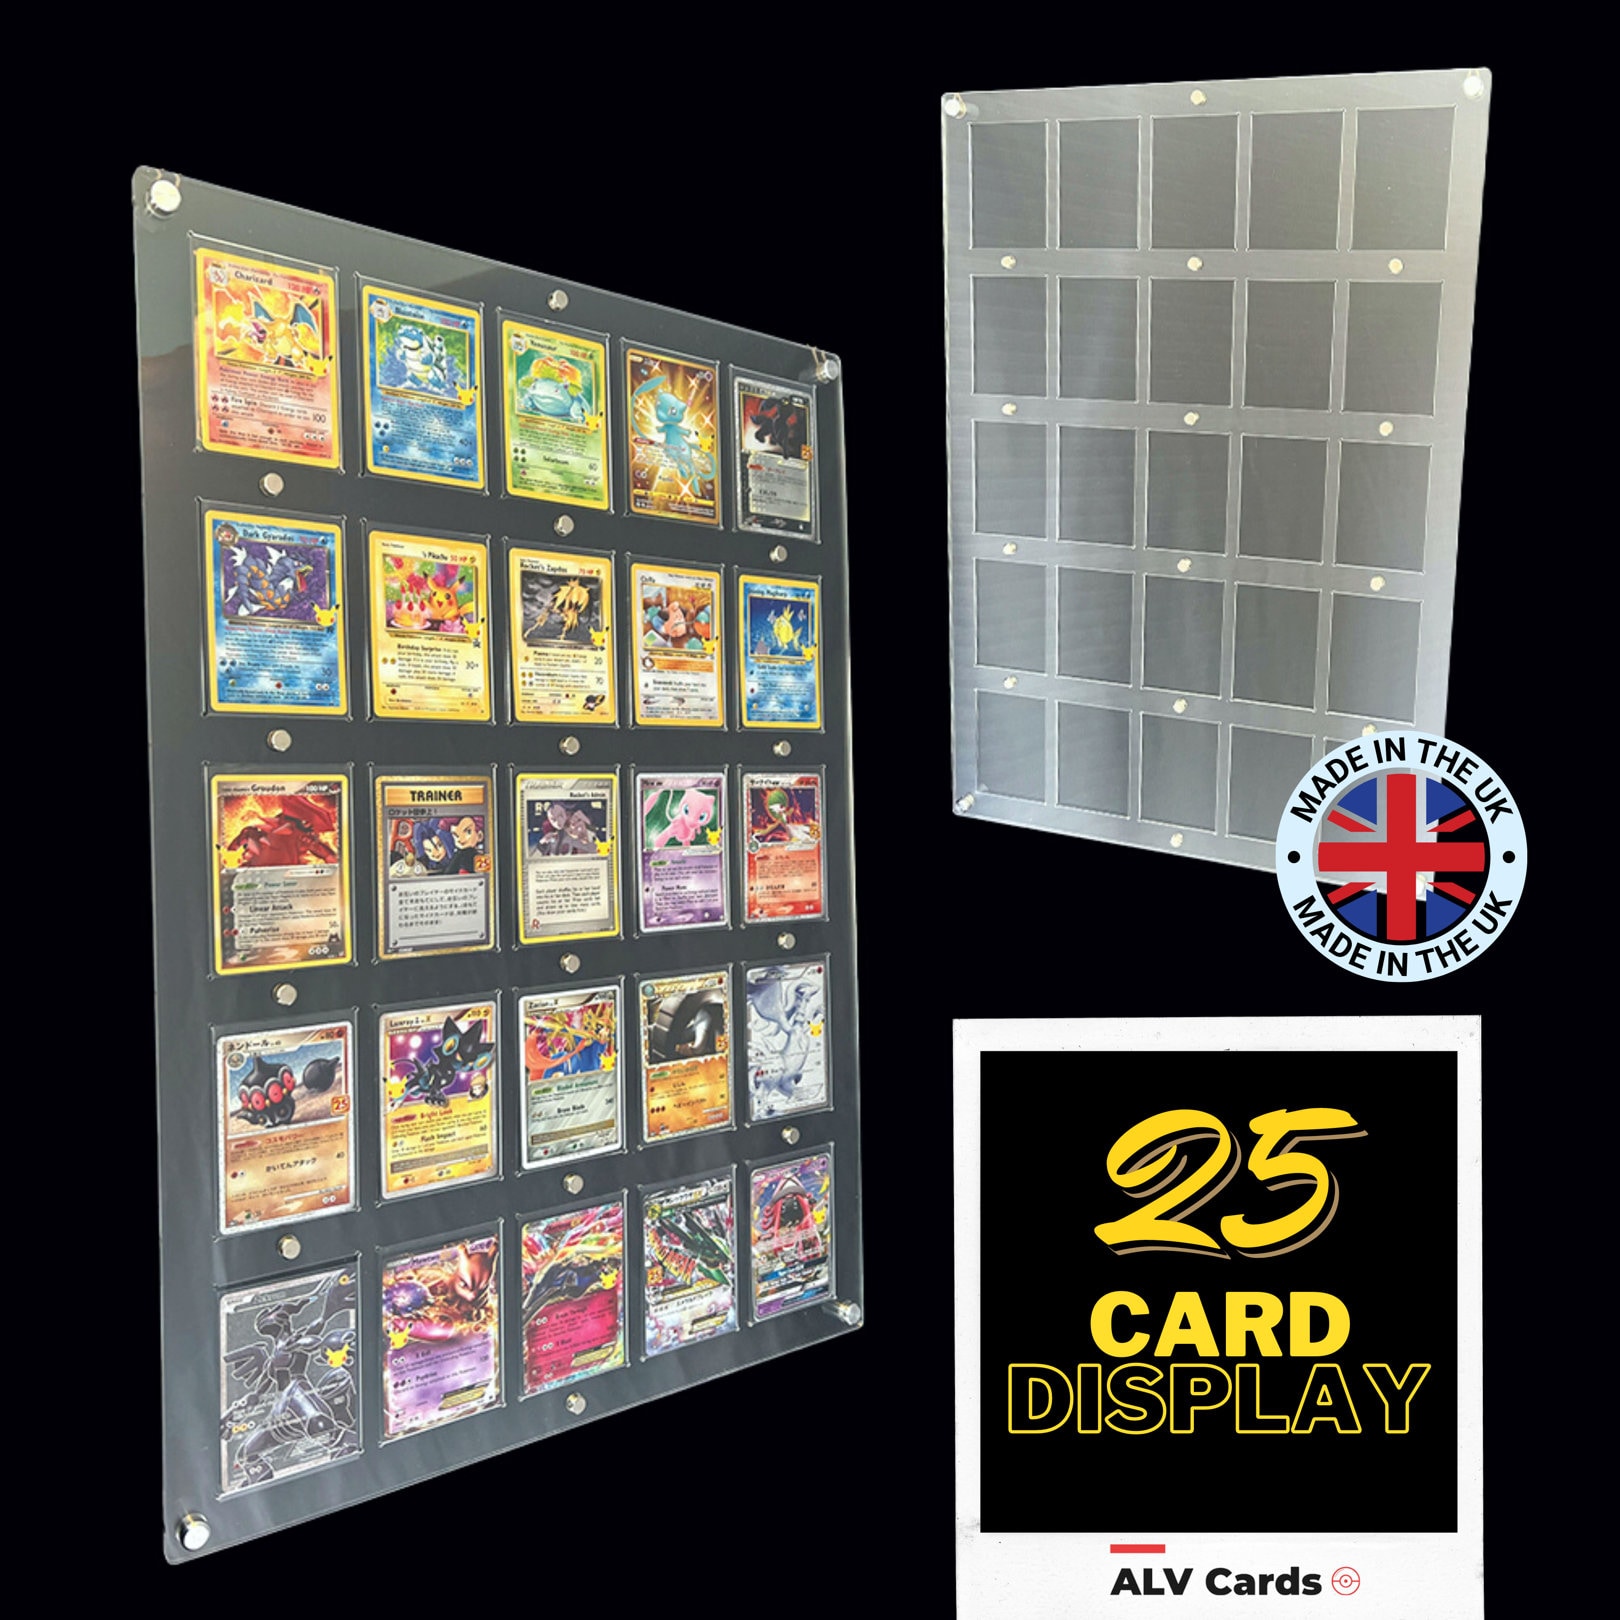 25 CARD POKEMON CARD DISPLAY. CAN BE CUSTOMIZED TO FIT ANY SIZE CASE!  QUALITY!!